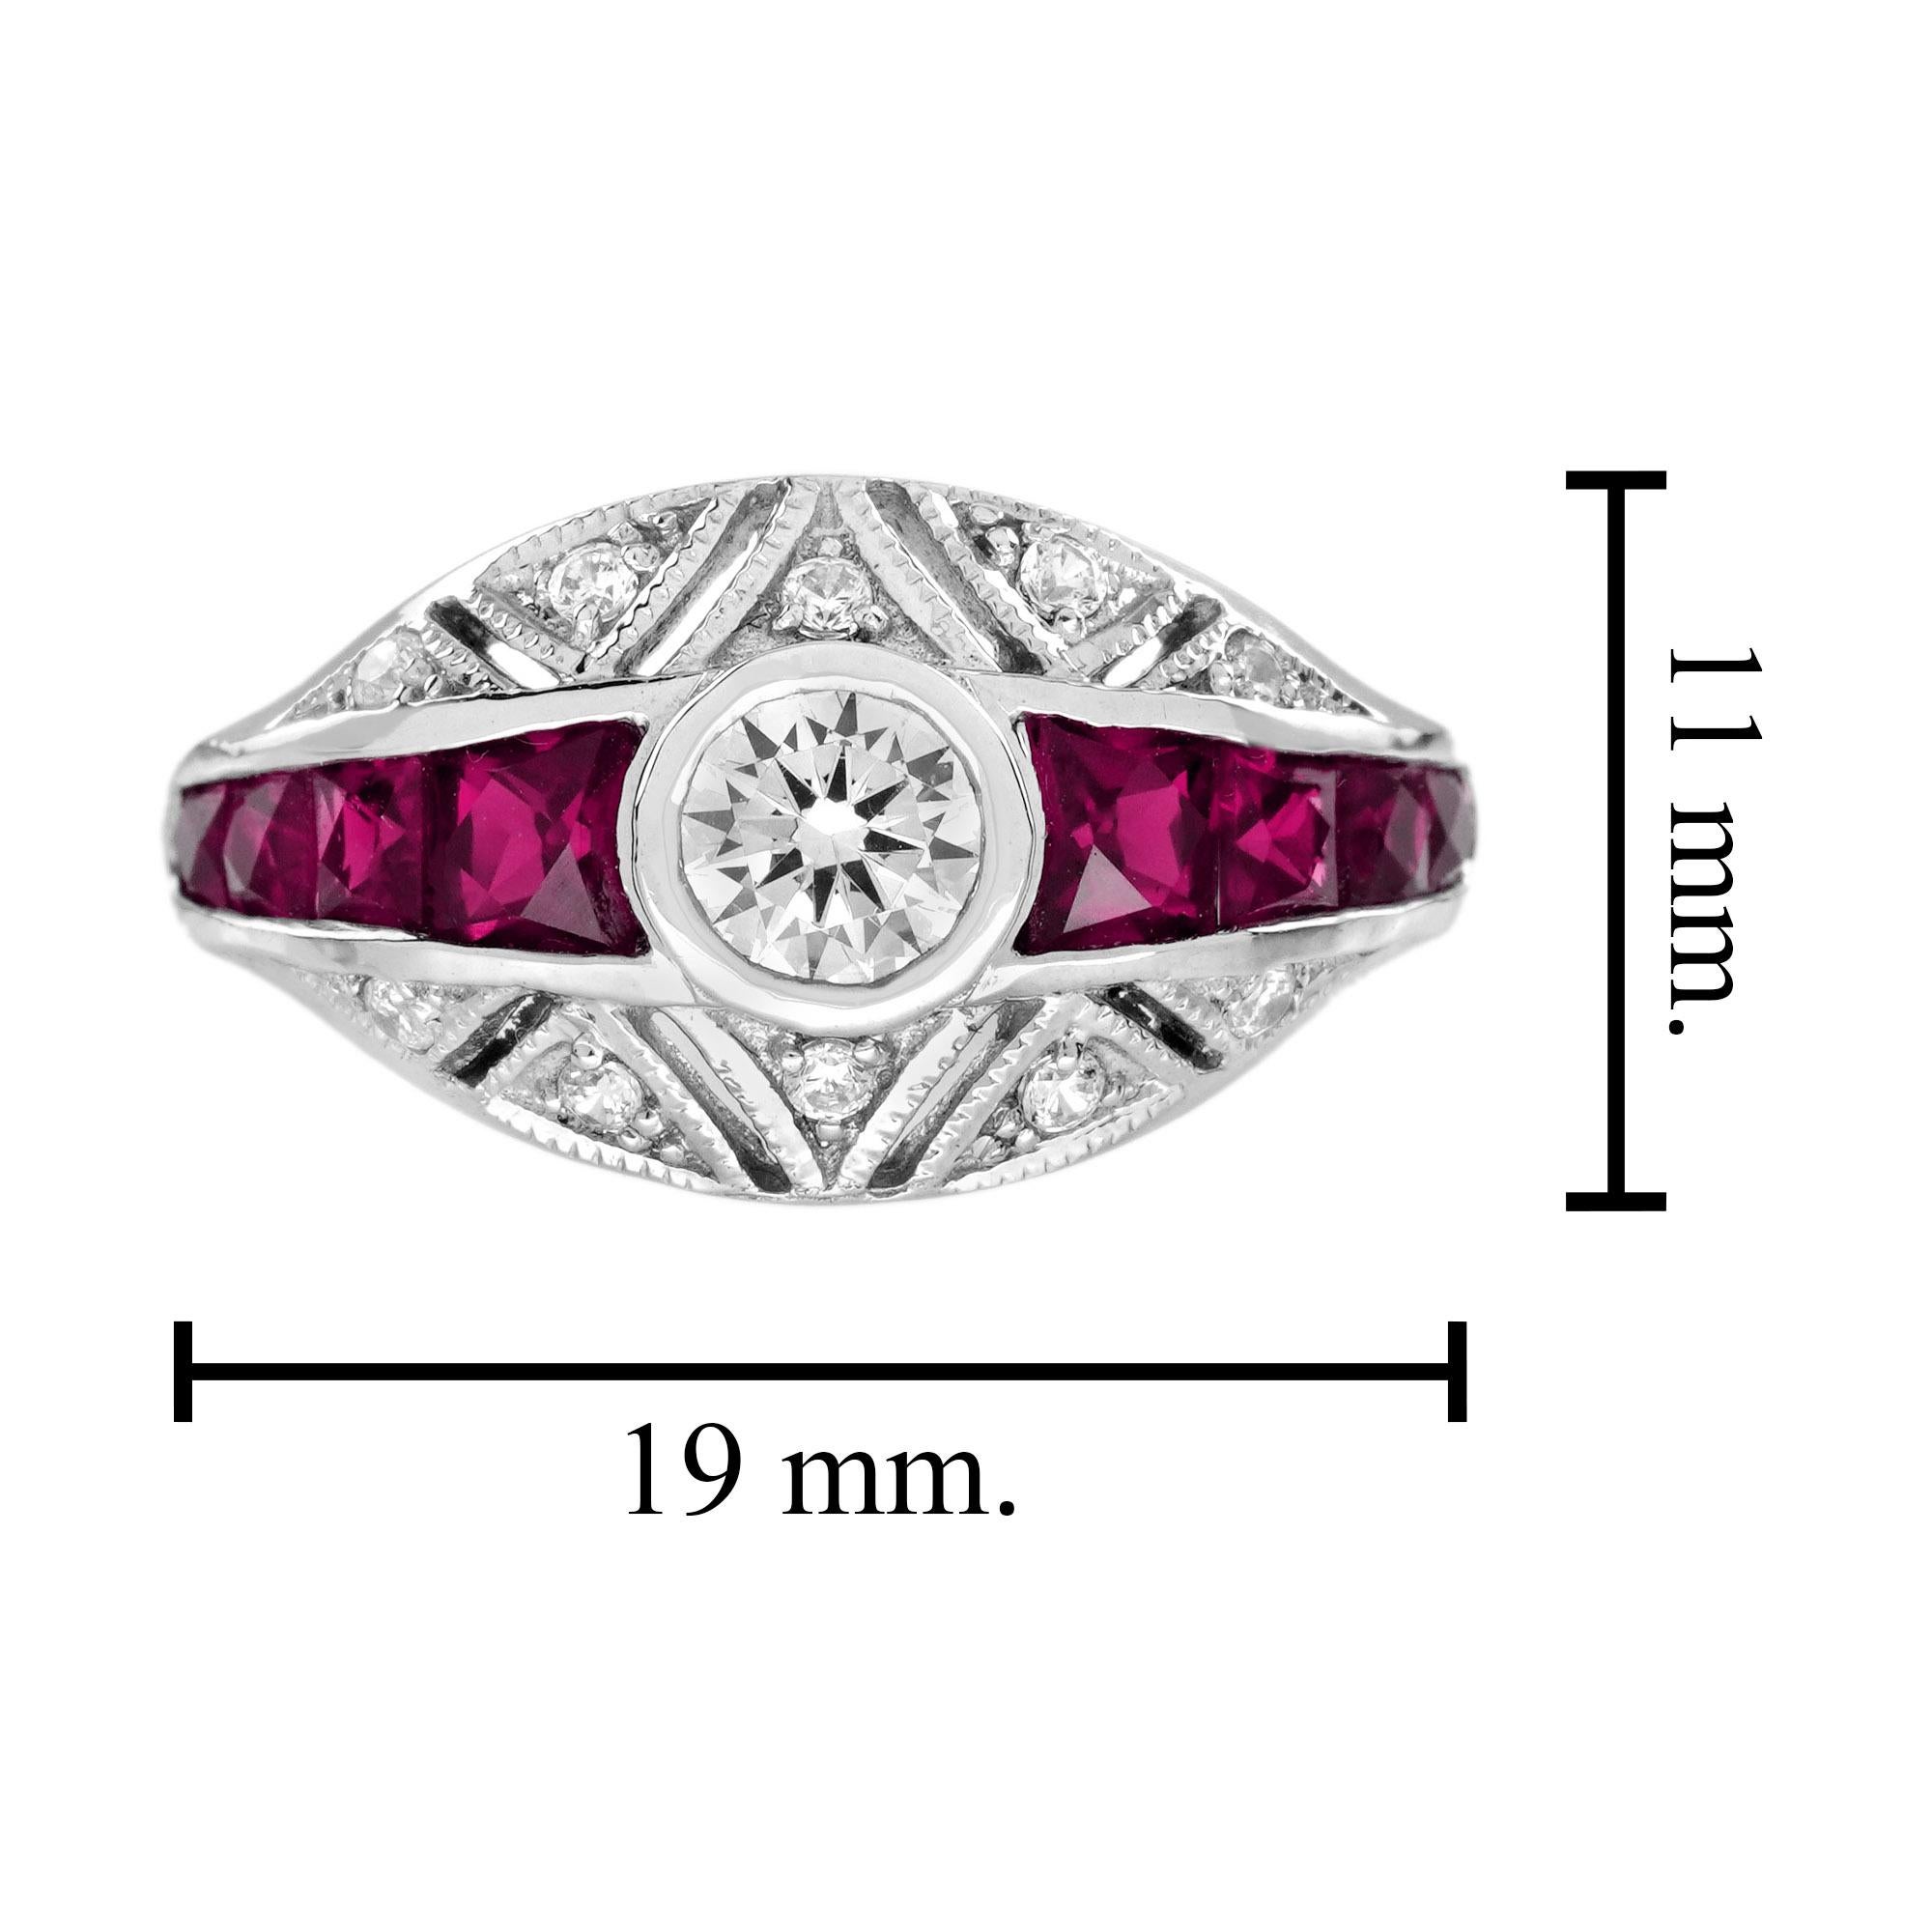 Diamond and Ruby Art Deco Style Bombay Ring in 18K White Gold For Sale 2